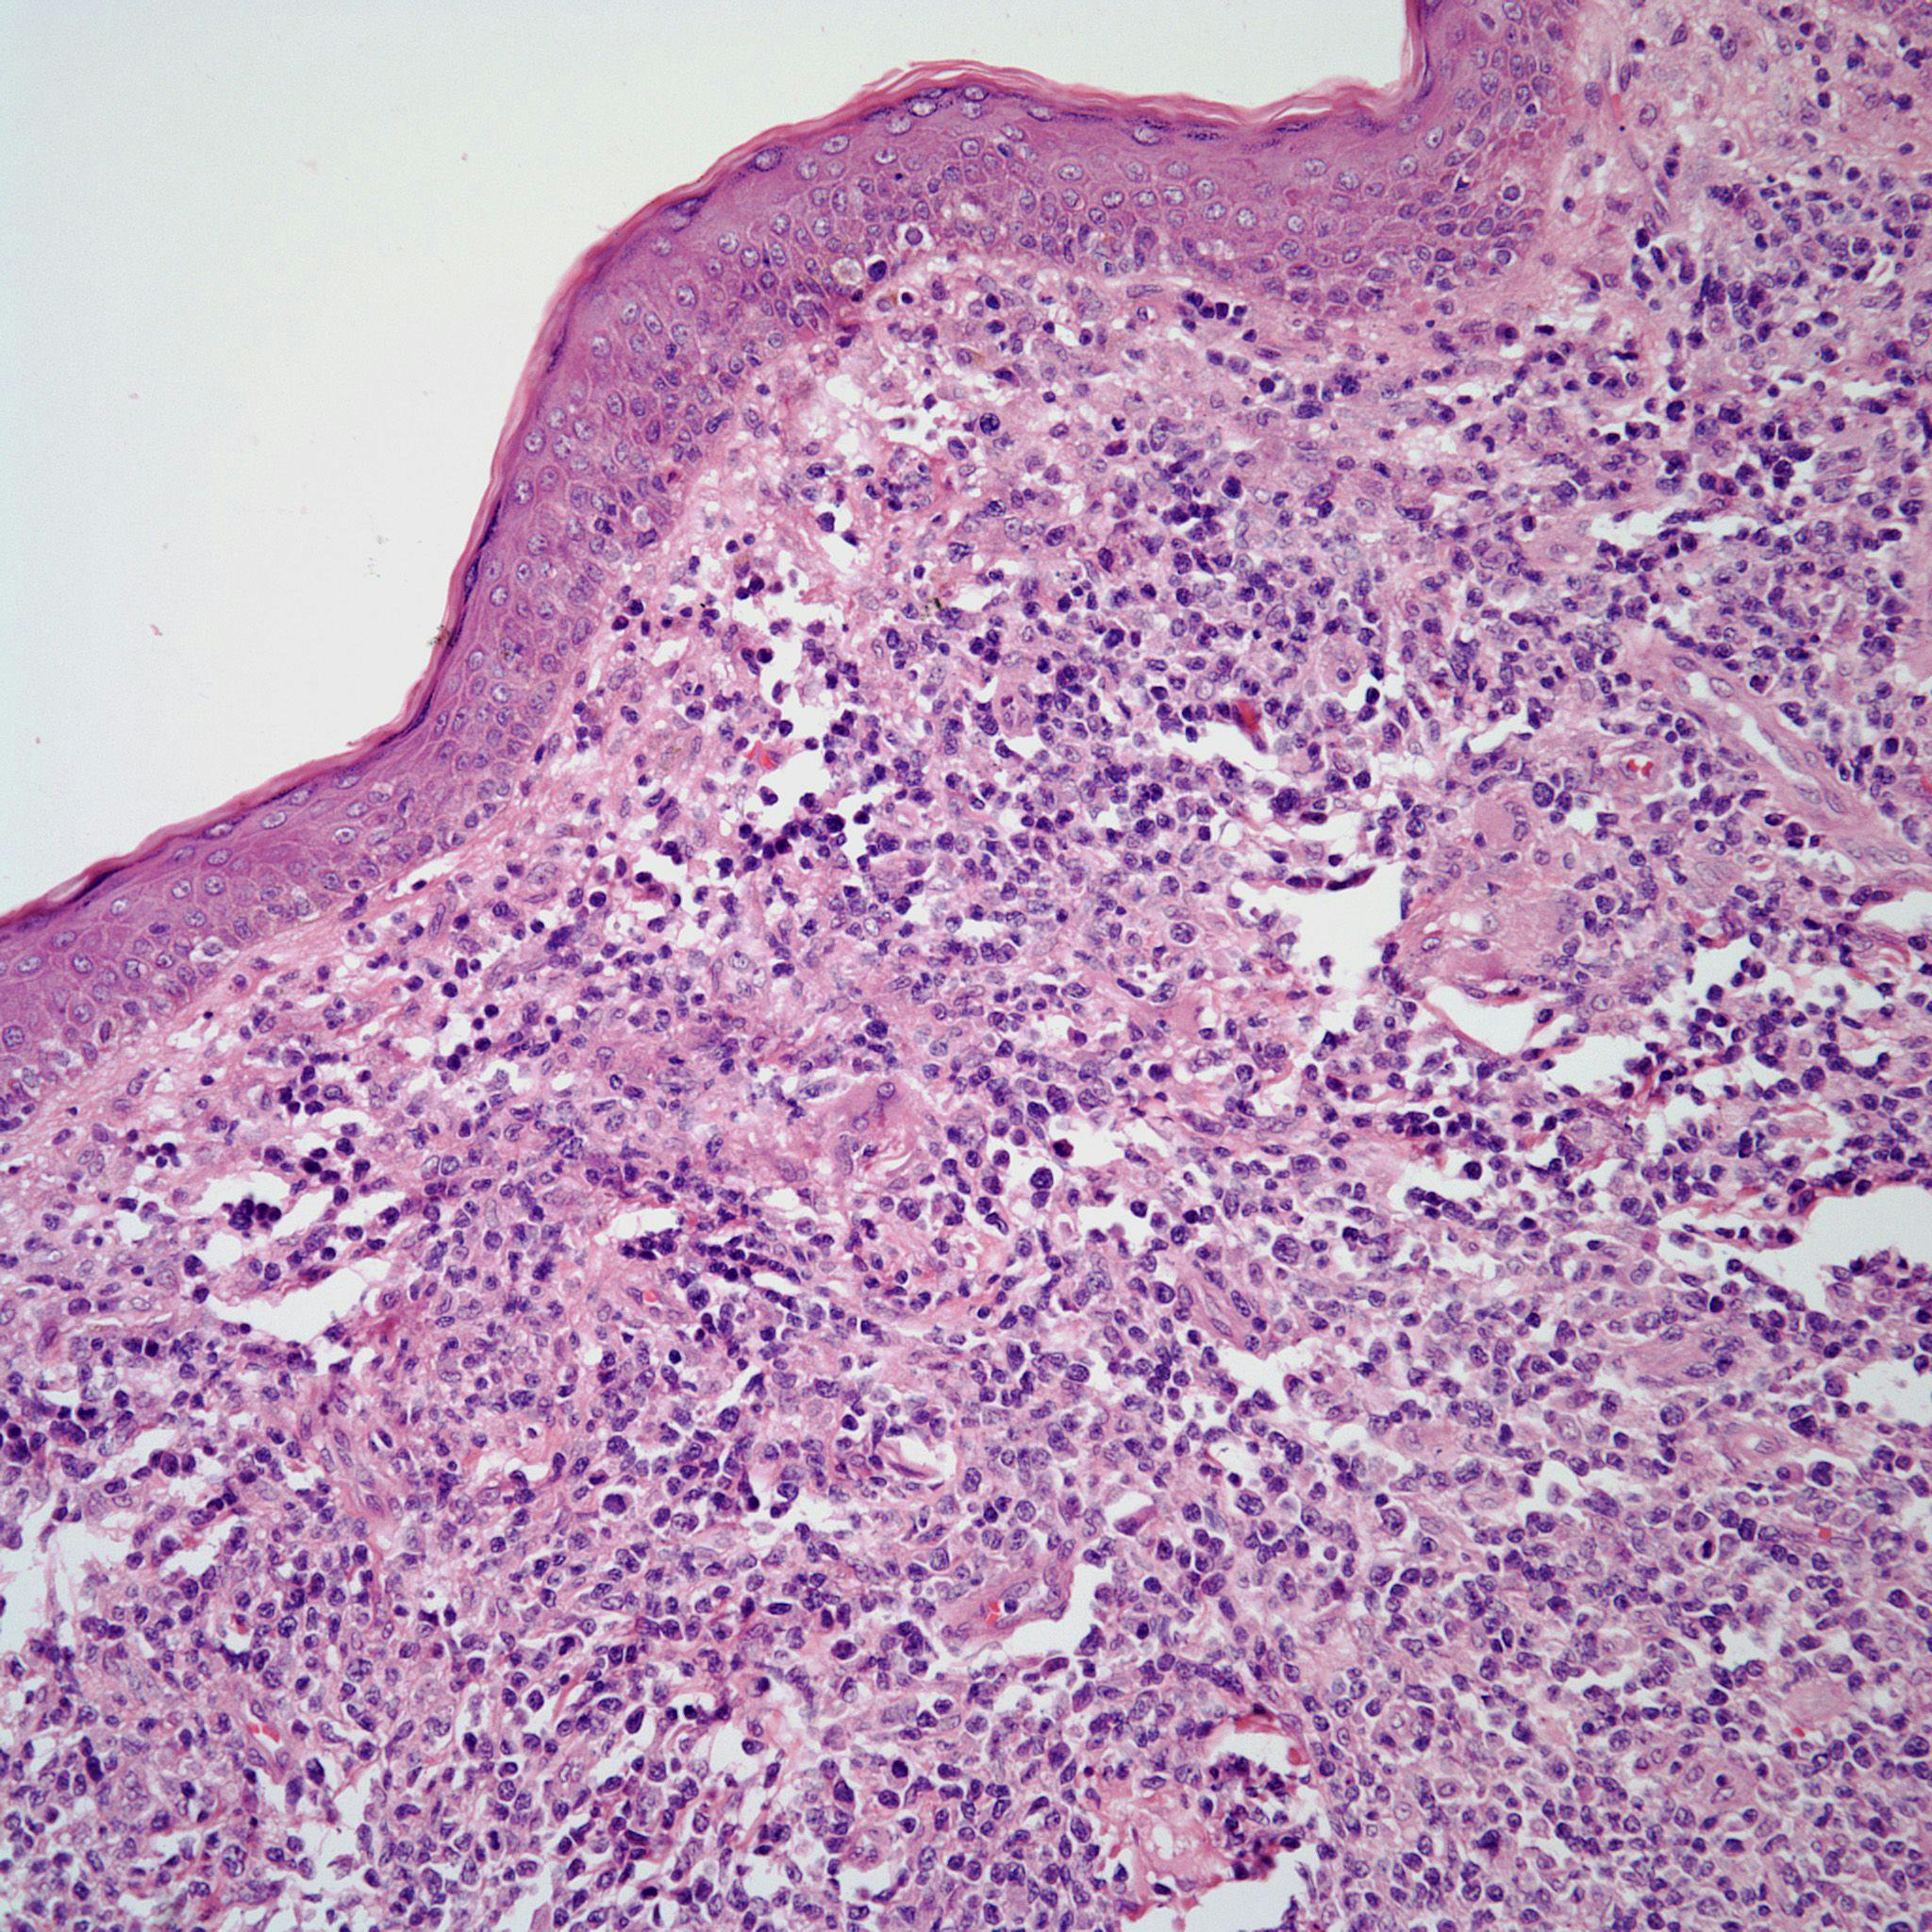 A 57-Year-Old Man With History of Pruritic Rashes